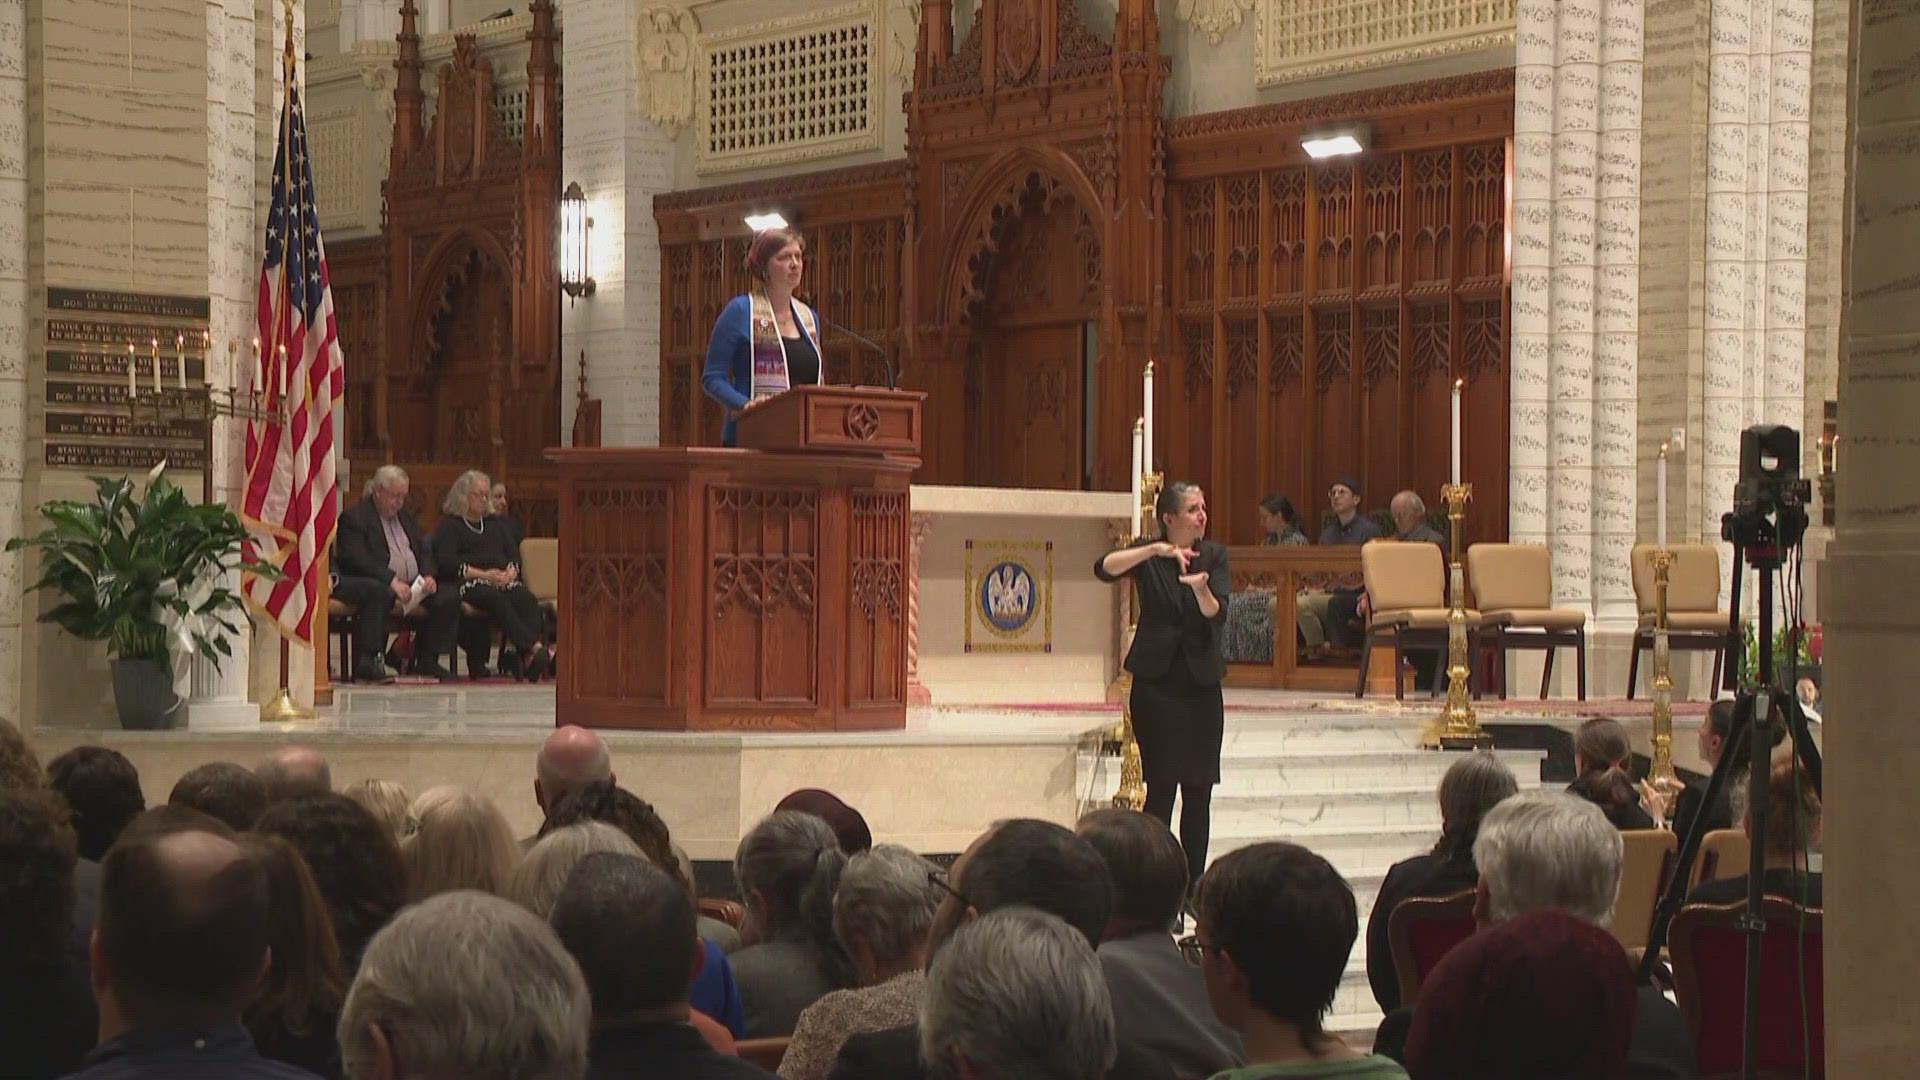 The event held at the Basilica of Saints Peter and Paul in Lewiston honored the victims and survivors of the Wednesday mass shooting.